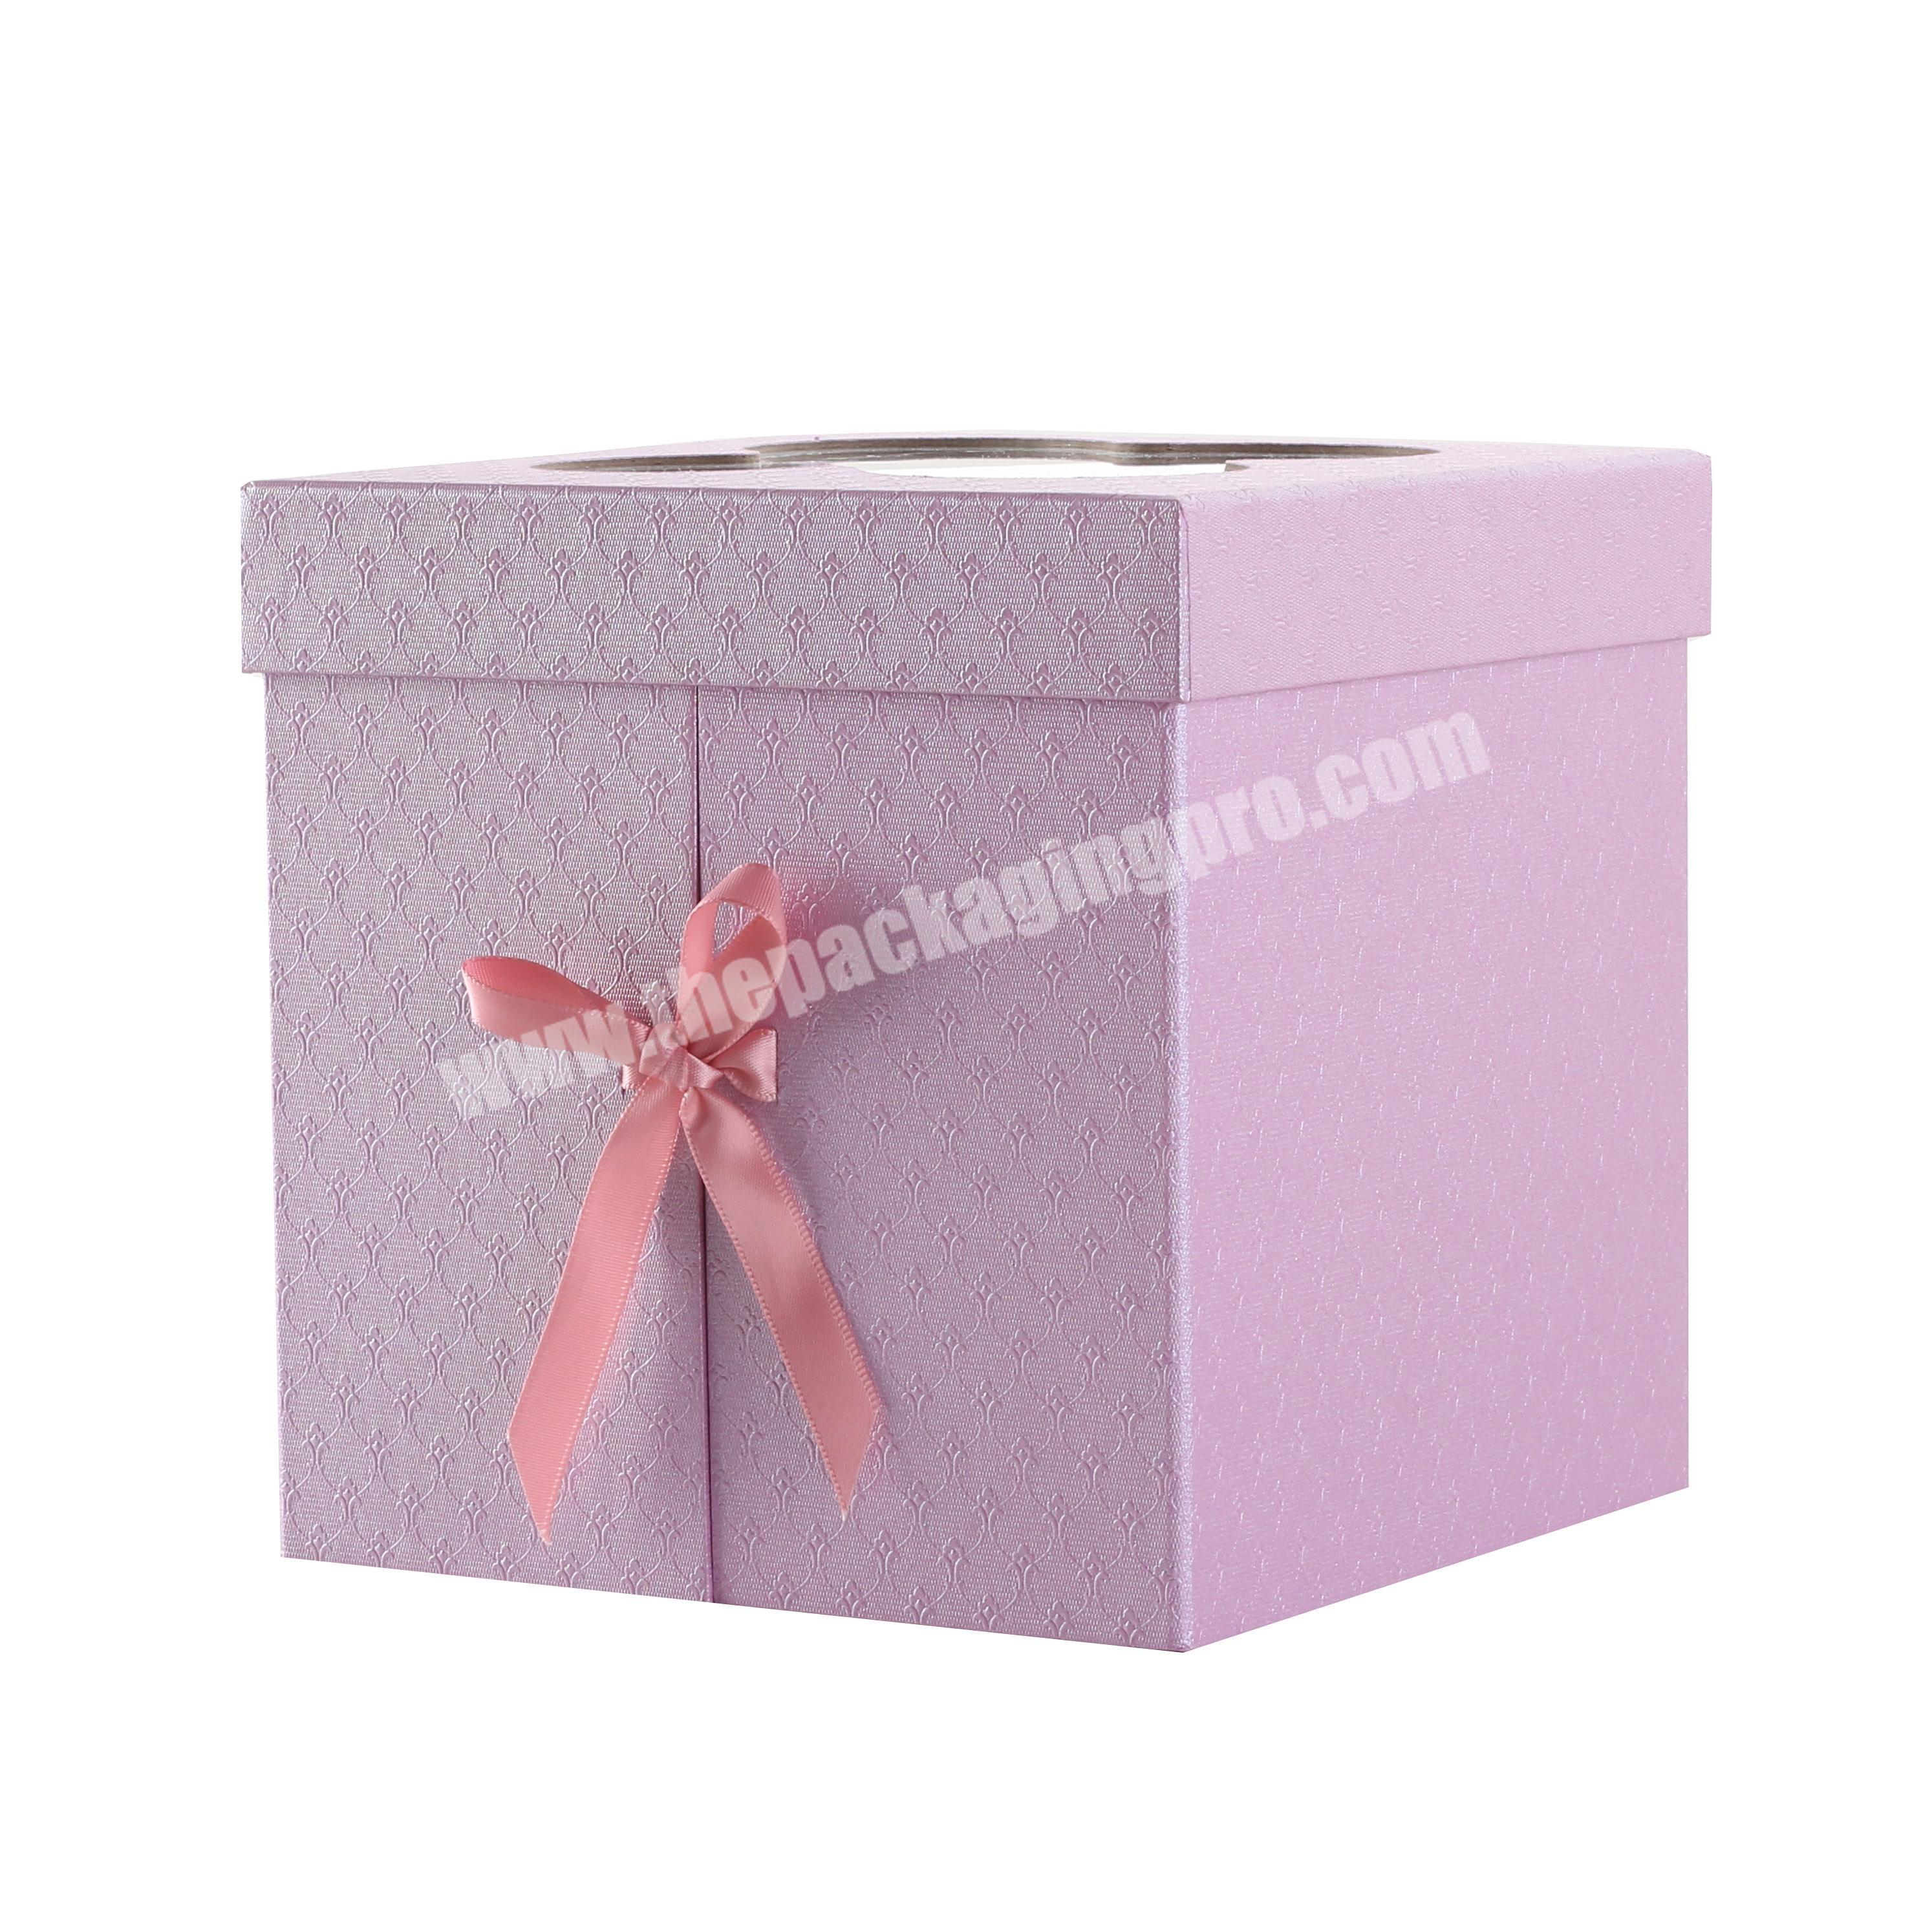 Custom rigid box set with window 3 boxes in one set with ribbon closure